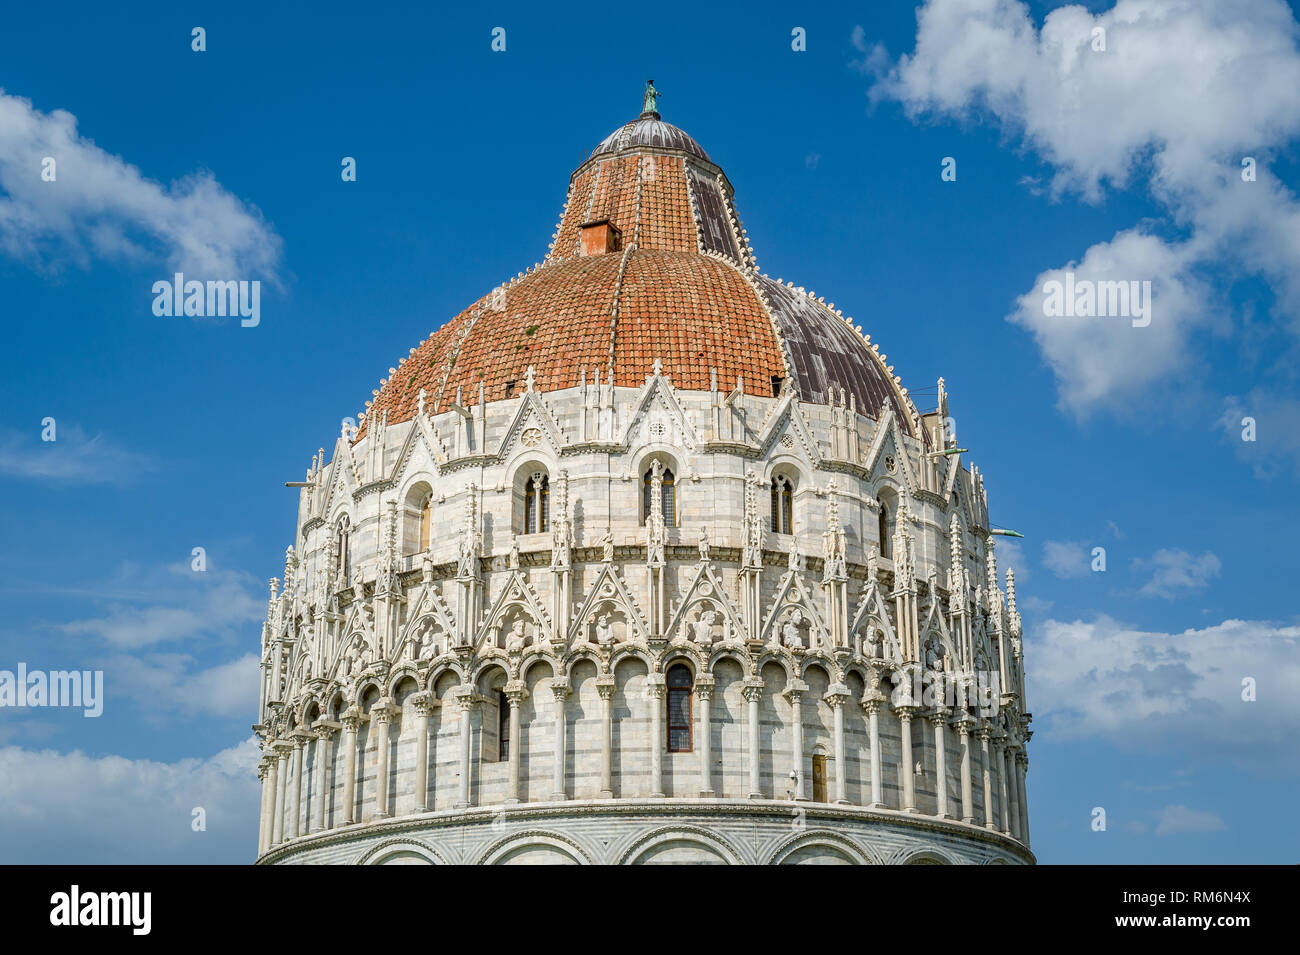 Pisa Baptistery close up view. Central square of old Pisa. Toscana, Italy Stock Photo